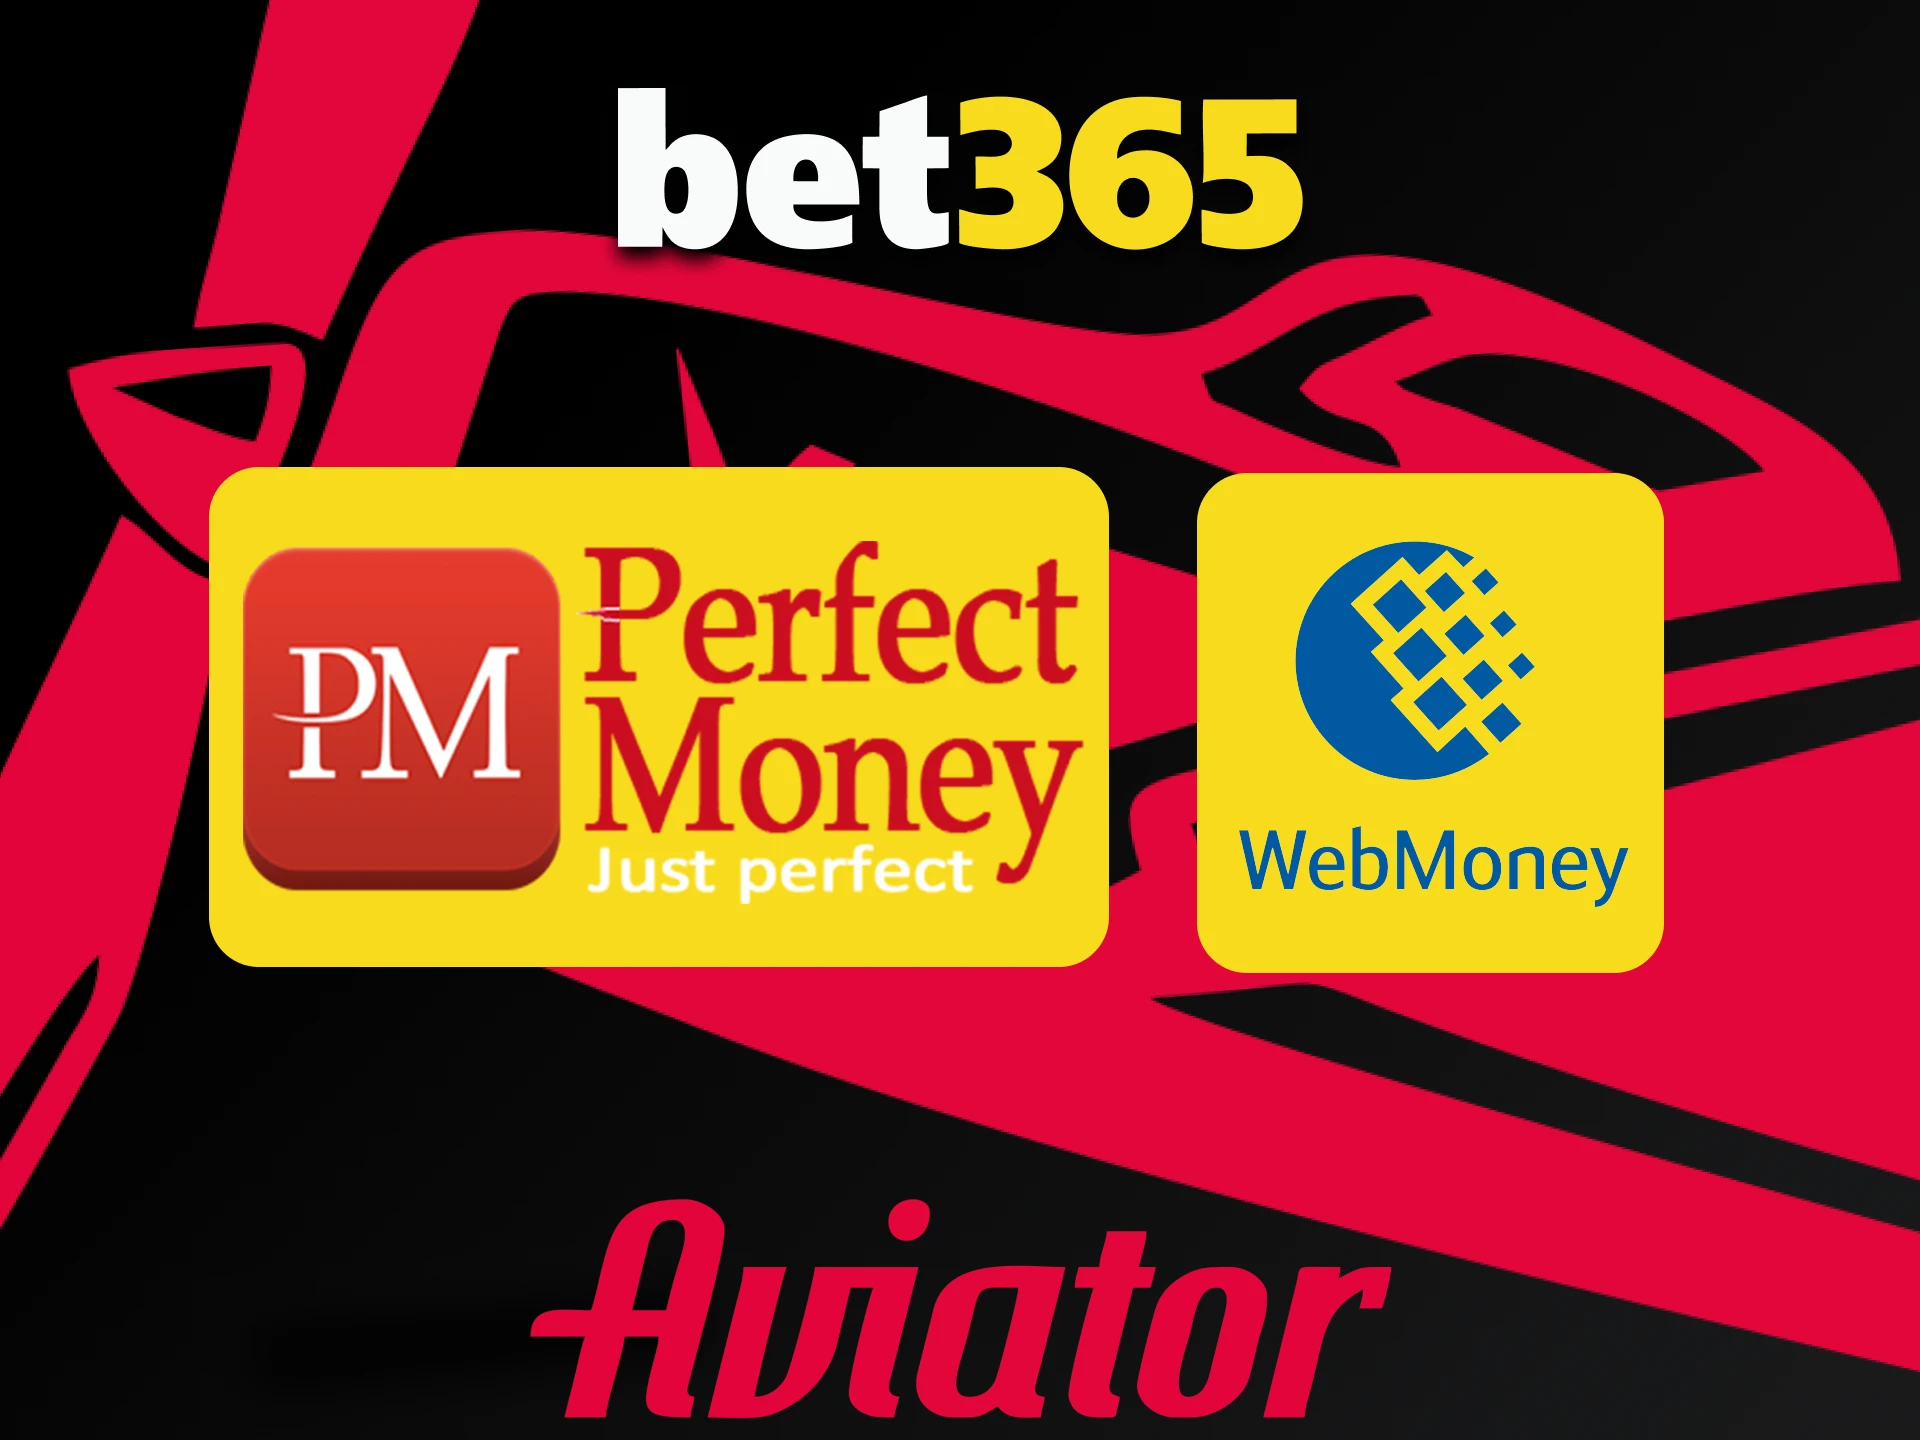 We will tell you how you can withdraw your funds from Bet365 for the Aviator game.